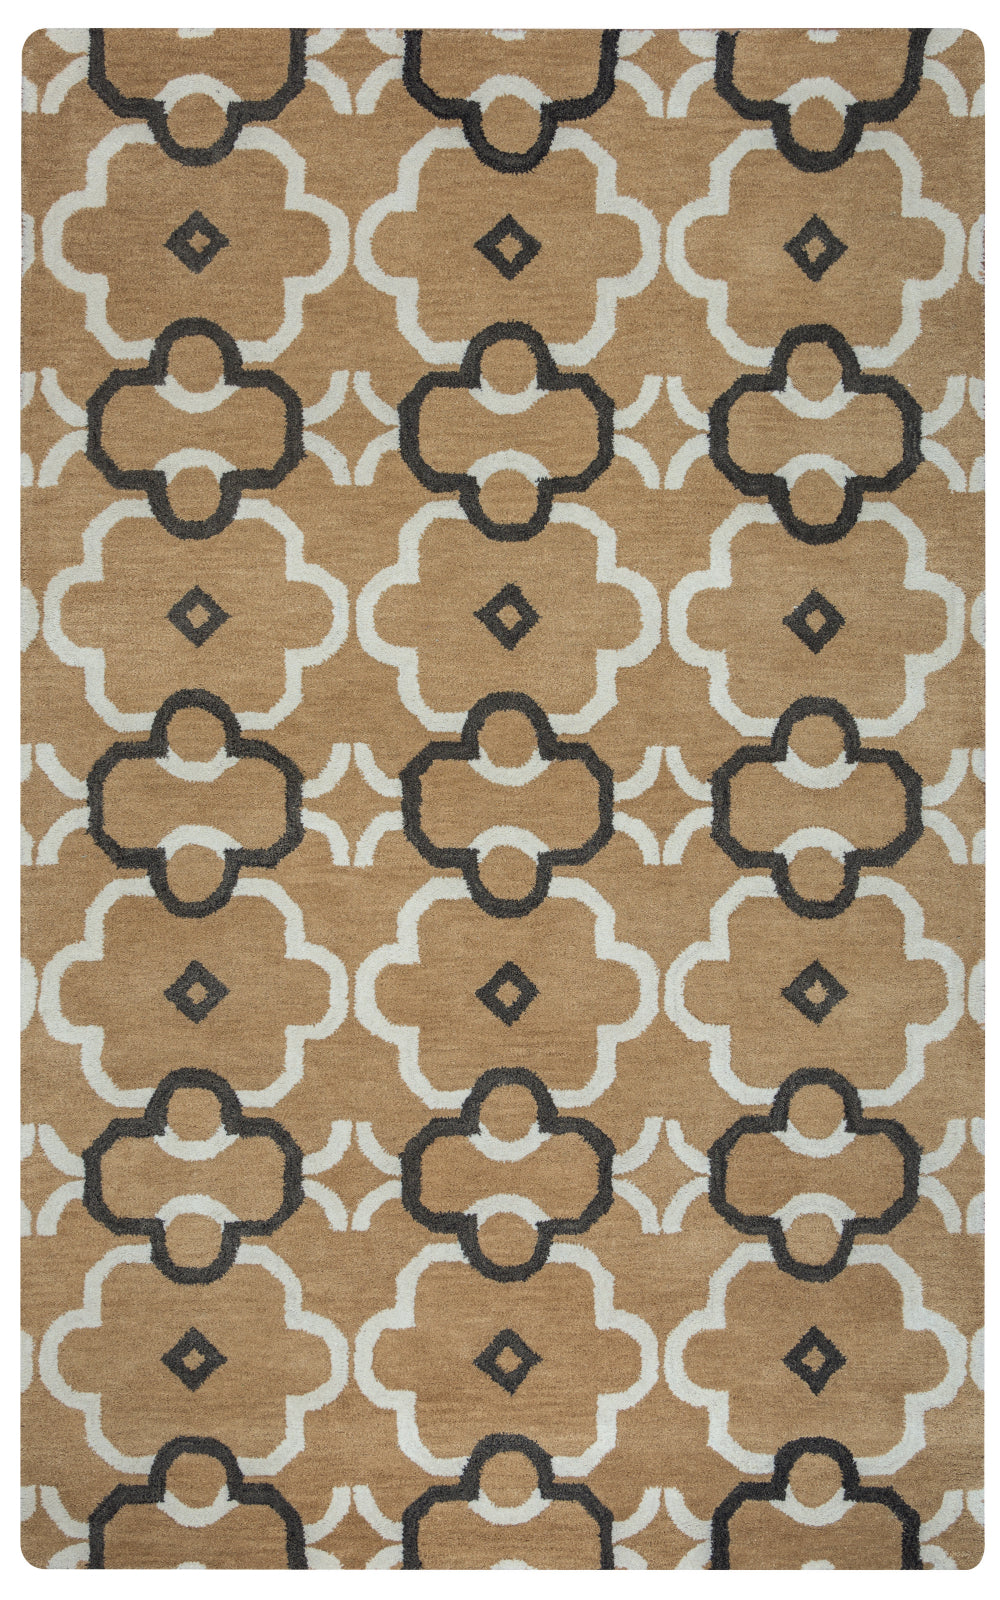 Rizzy Opus OP8959 camel Area Rug main image